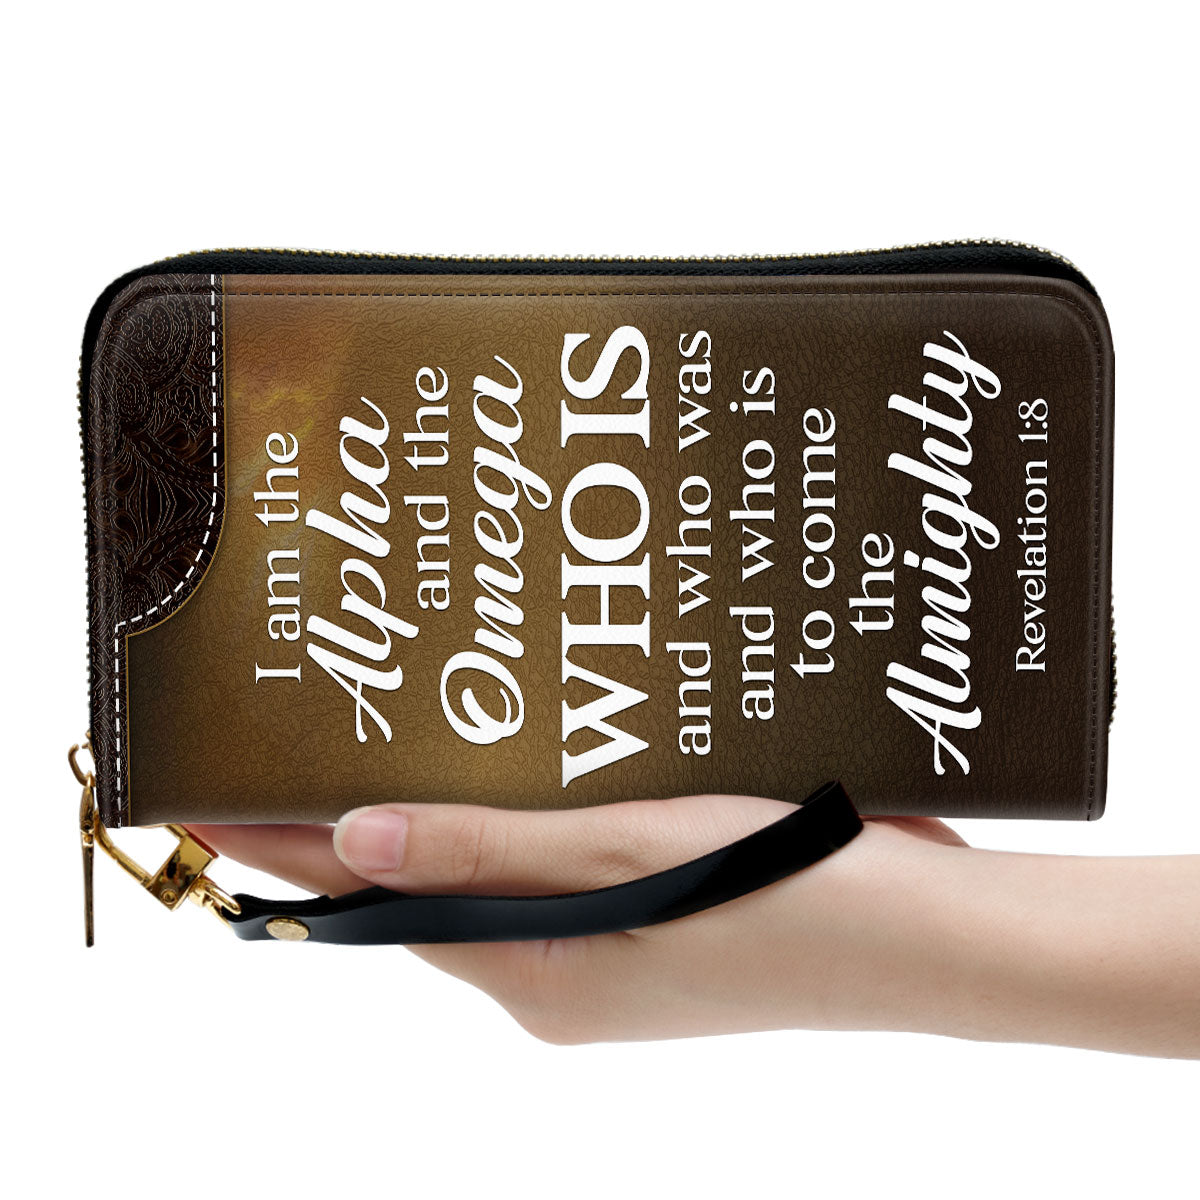 Jesuspirit | Personalized Zippered Leather Clutch Purse | I Am The Alpha And The Omega | Revelation 1:8 | Christ Gifts With Bible Scripture For Women NUM457C